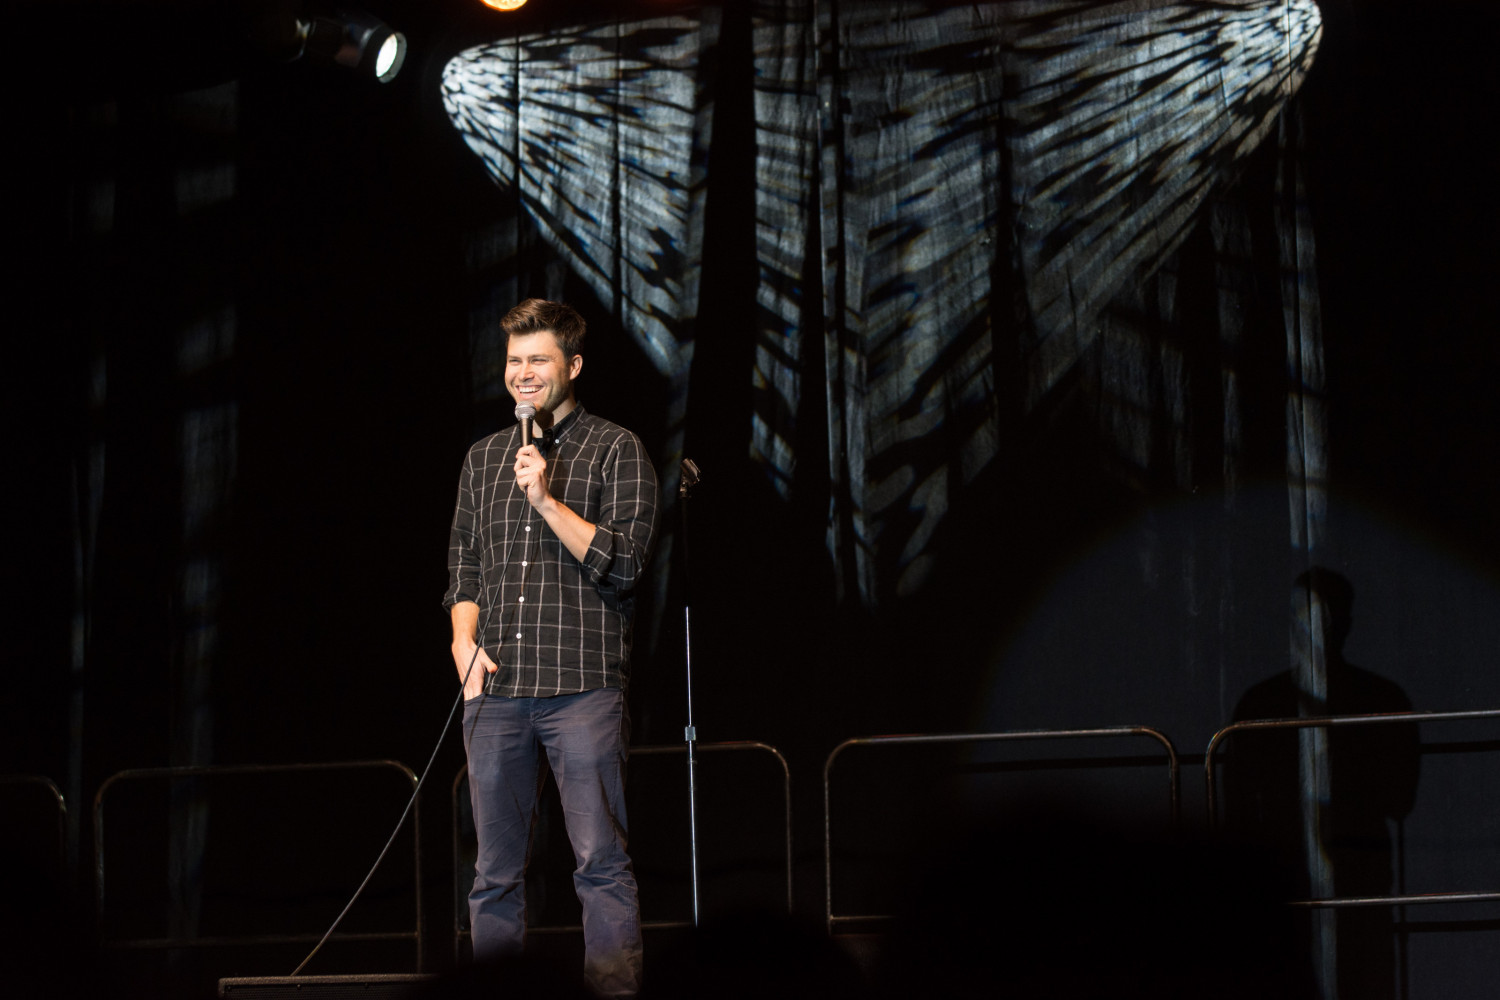 ... who joined SNL's Colin Jost at Carthage for twice the laughs.